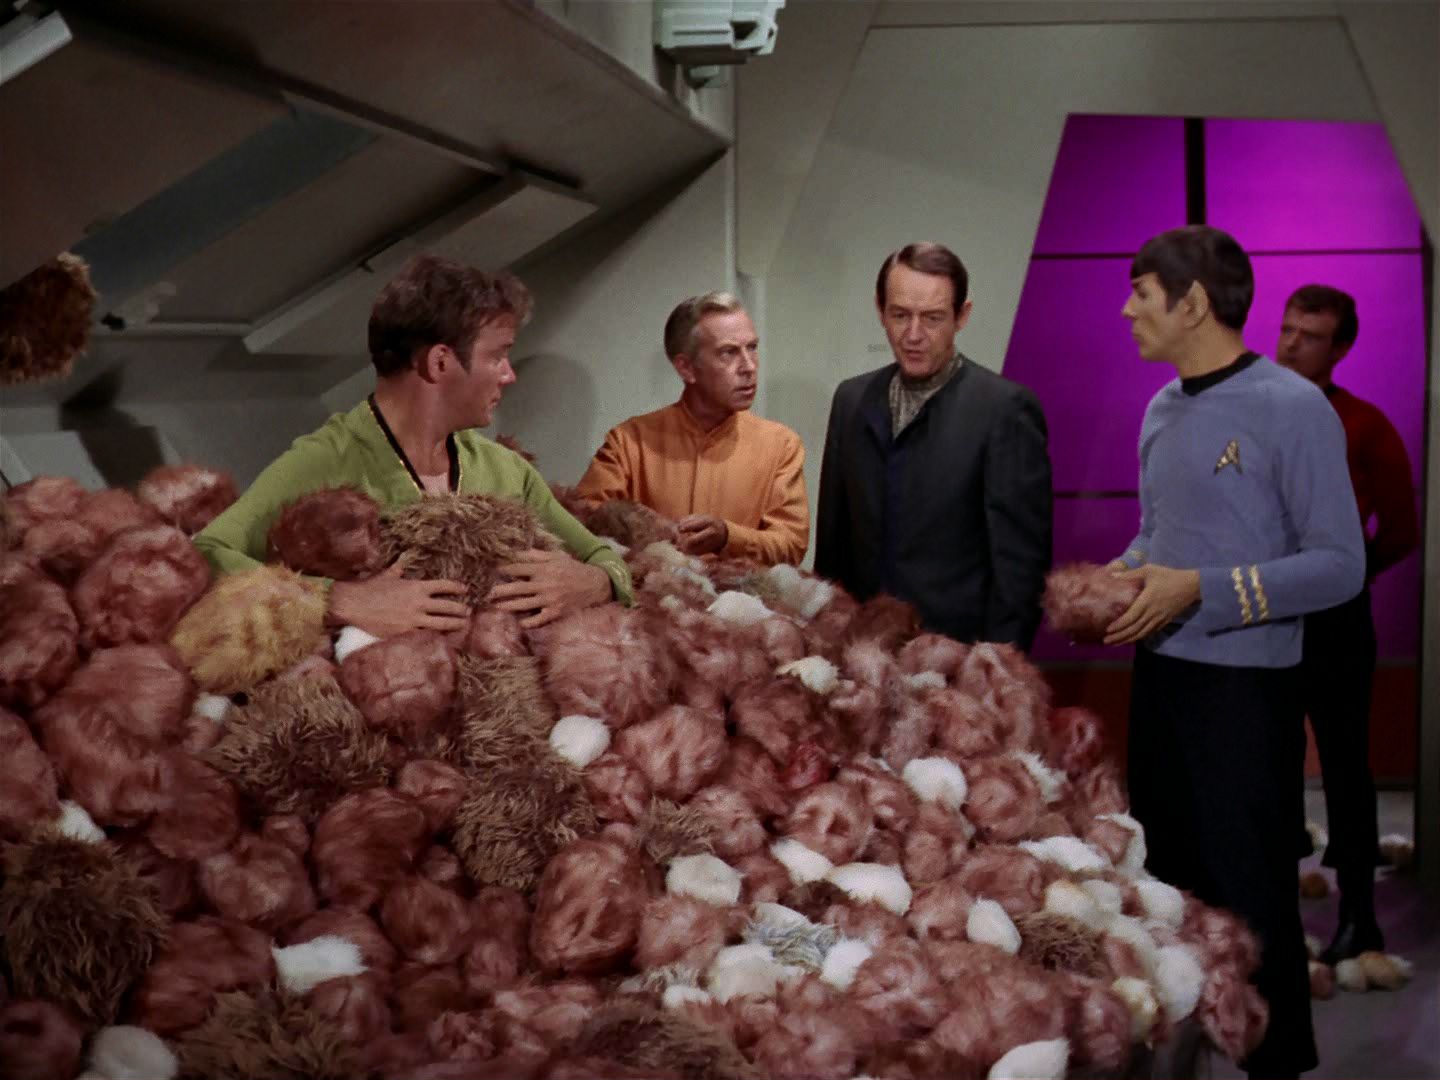 https://tos.star-trek.info/albums/Season_2/2x15_The_Trouble_With_Tribbles/ariane179254_StarTrek_2x15_TheTroubleWithTribbles_1231.jpg